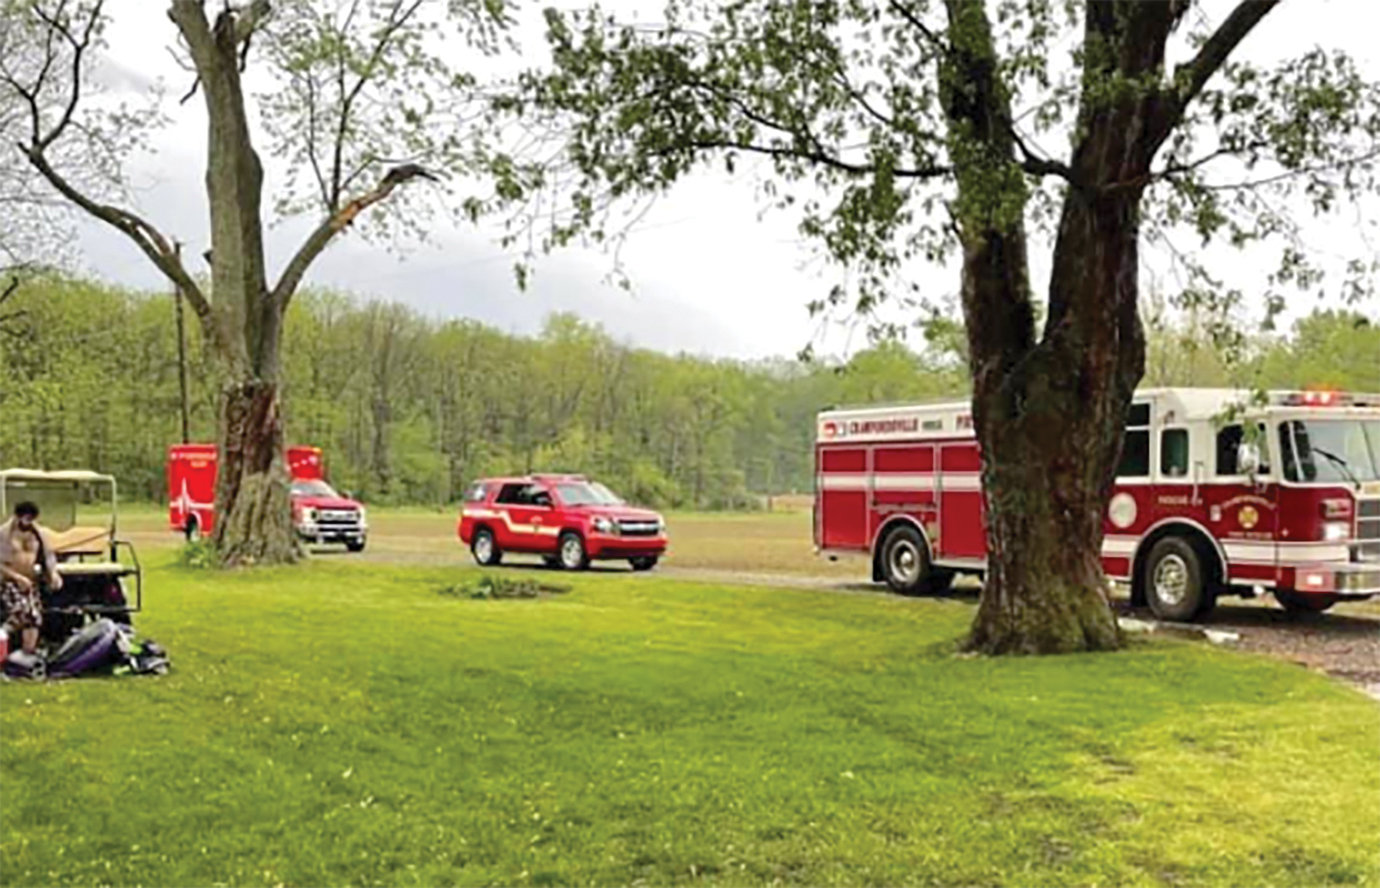 Crews from the Crawfordsville Fire Department arrive at the scene along Sugar Creek near the Sugar Cliff neighborhood Saturday in response to reports of a group of kayakers needing assistance. A pregnant woman was provided medical evaluation and transported to a medical facility where she was later released with no complications.